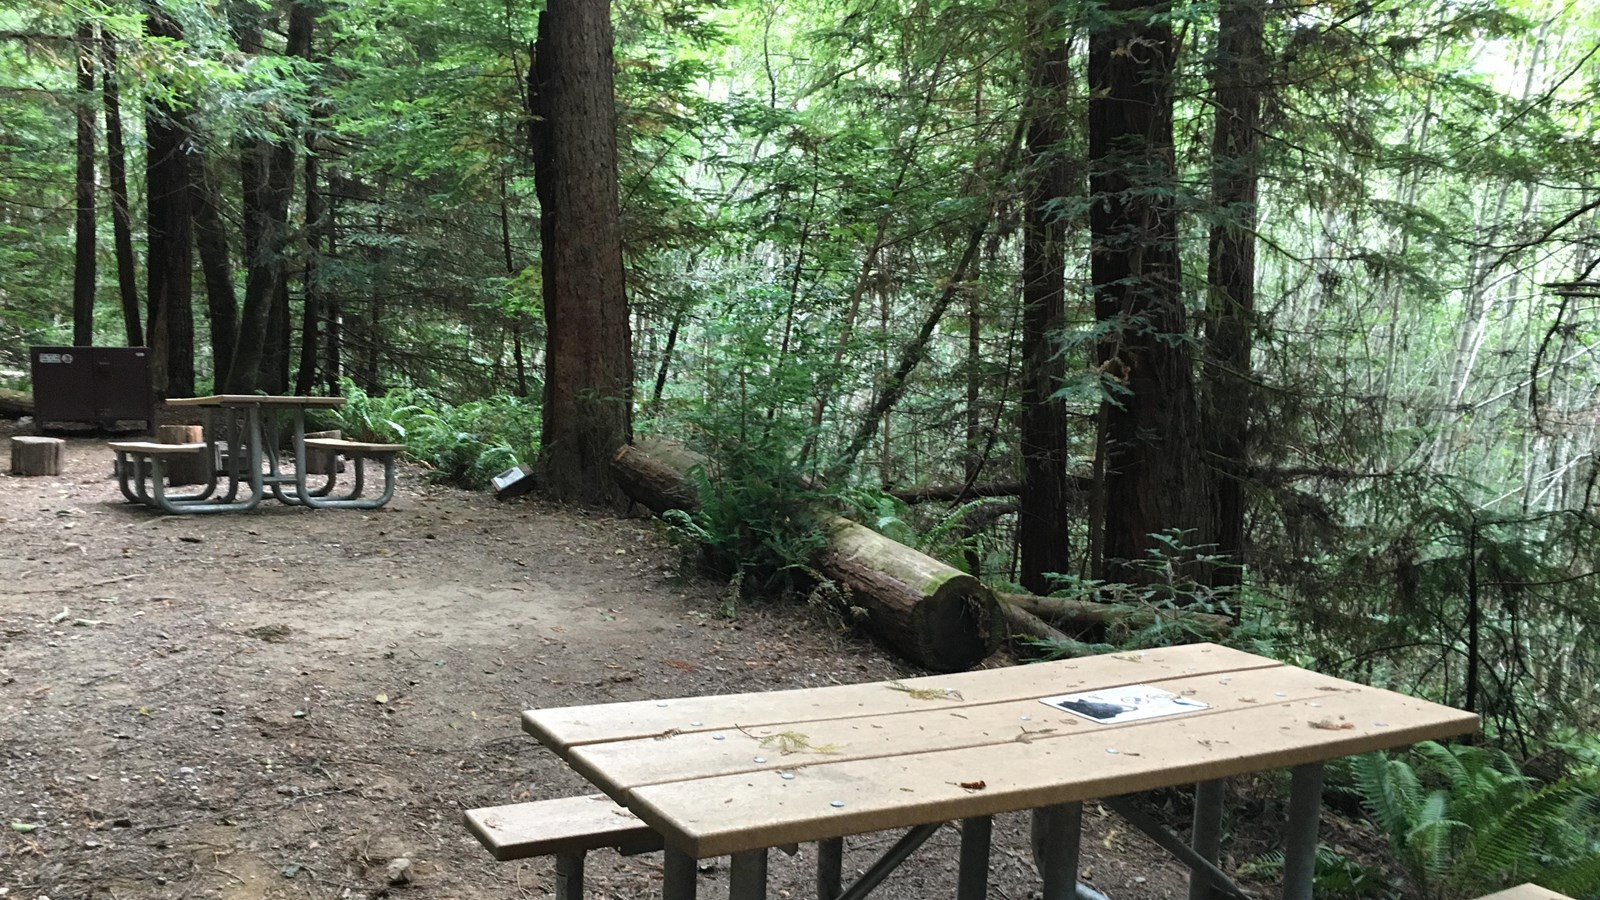 Picnic tables on dirt are surrounded by trees.